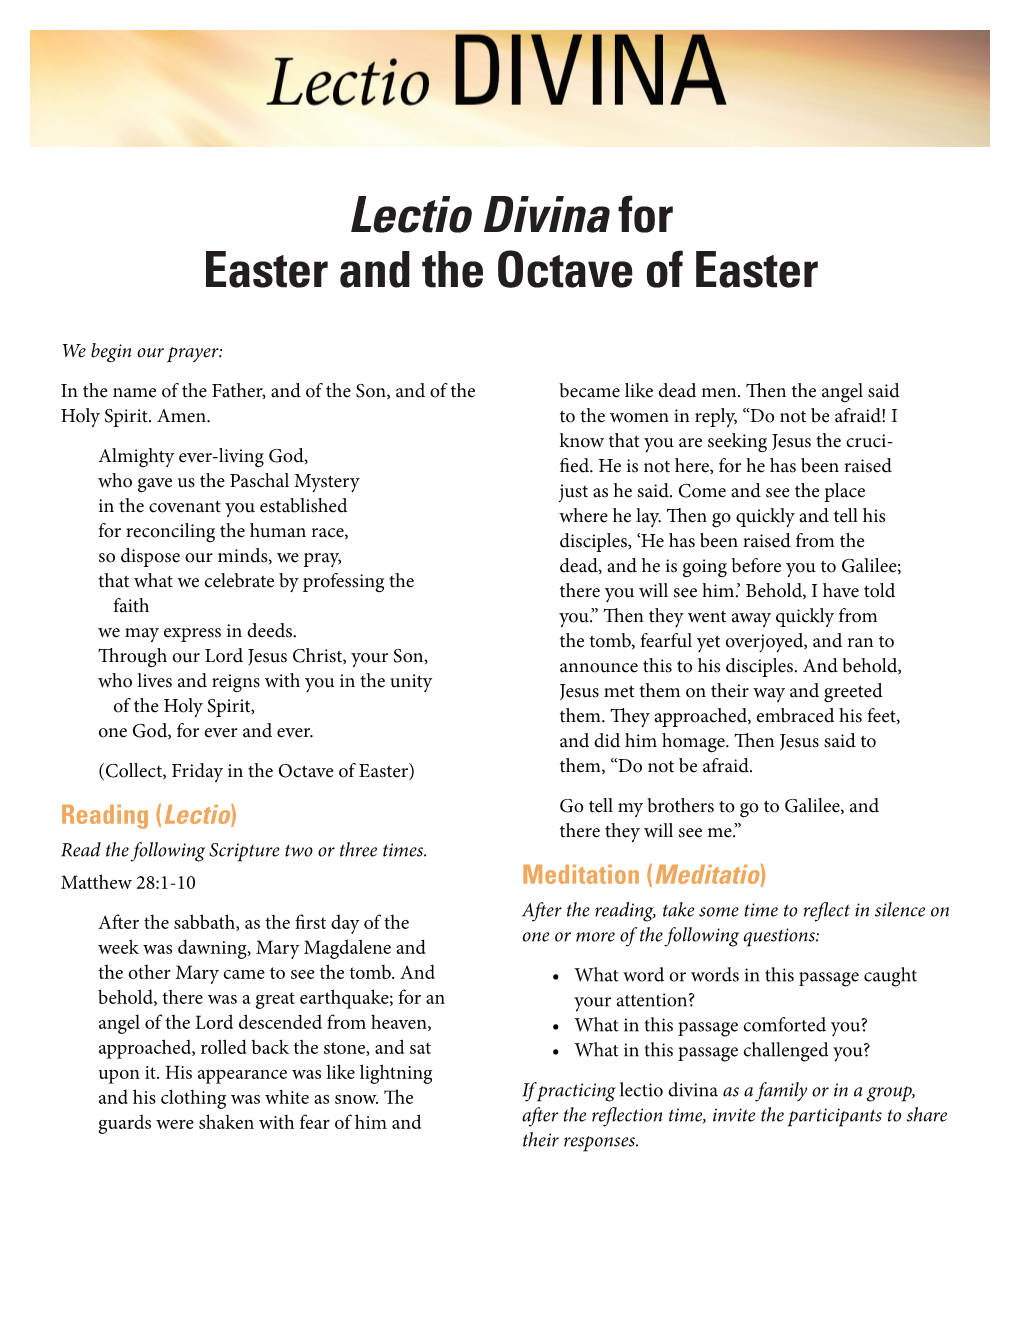 Lectio Divina for Easter and the Octave of Easter